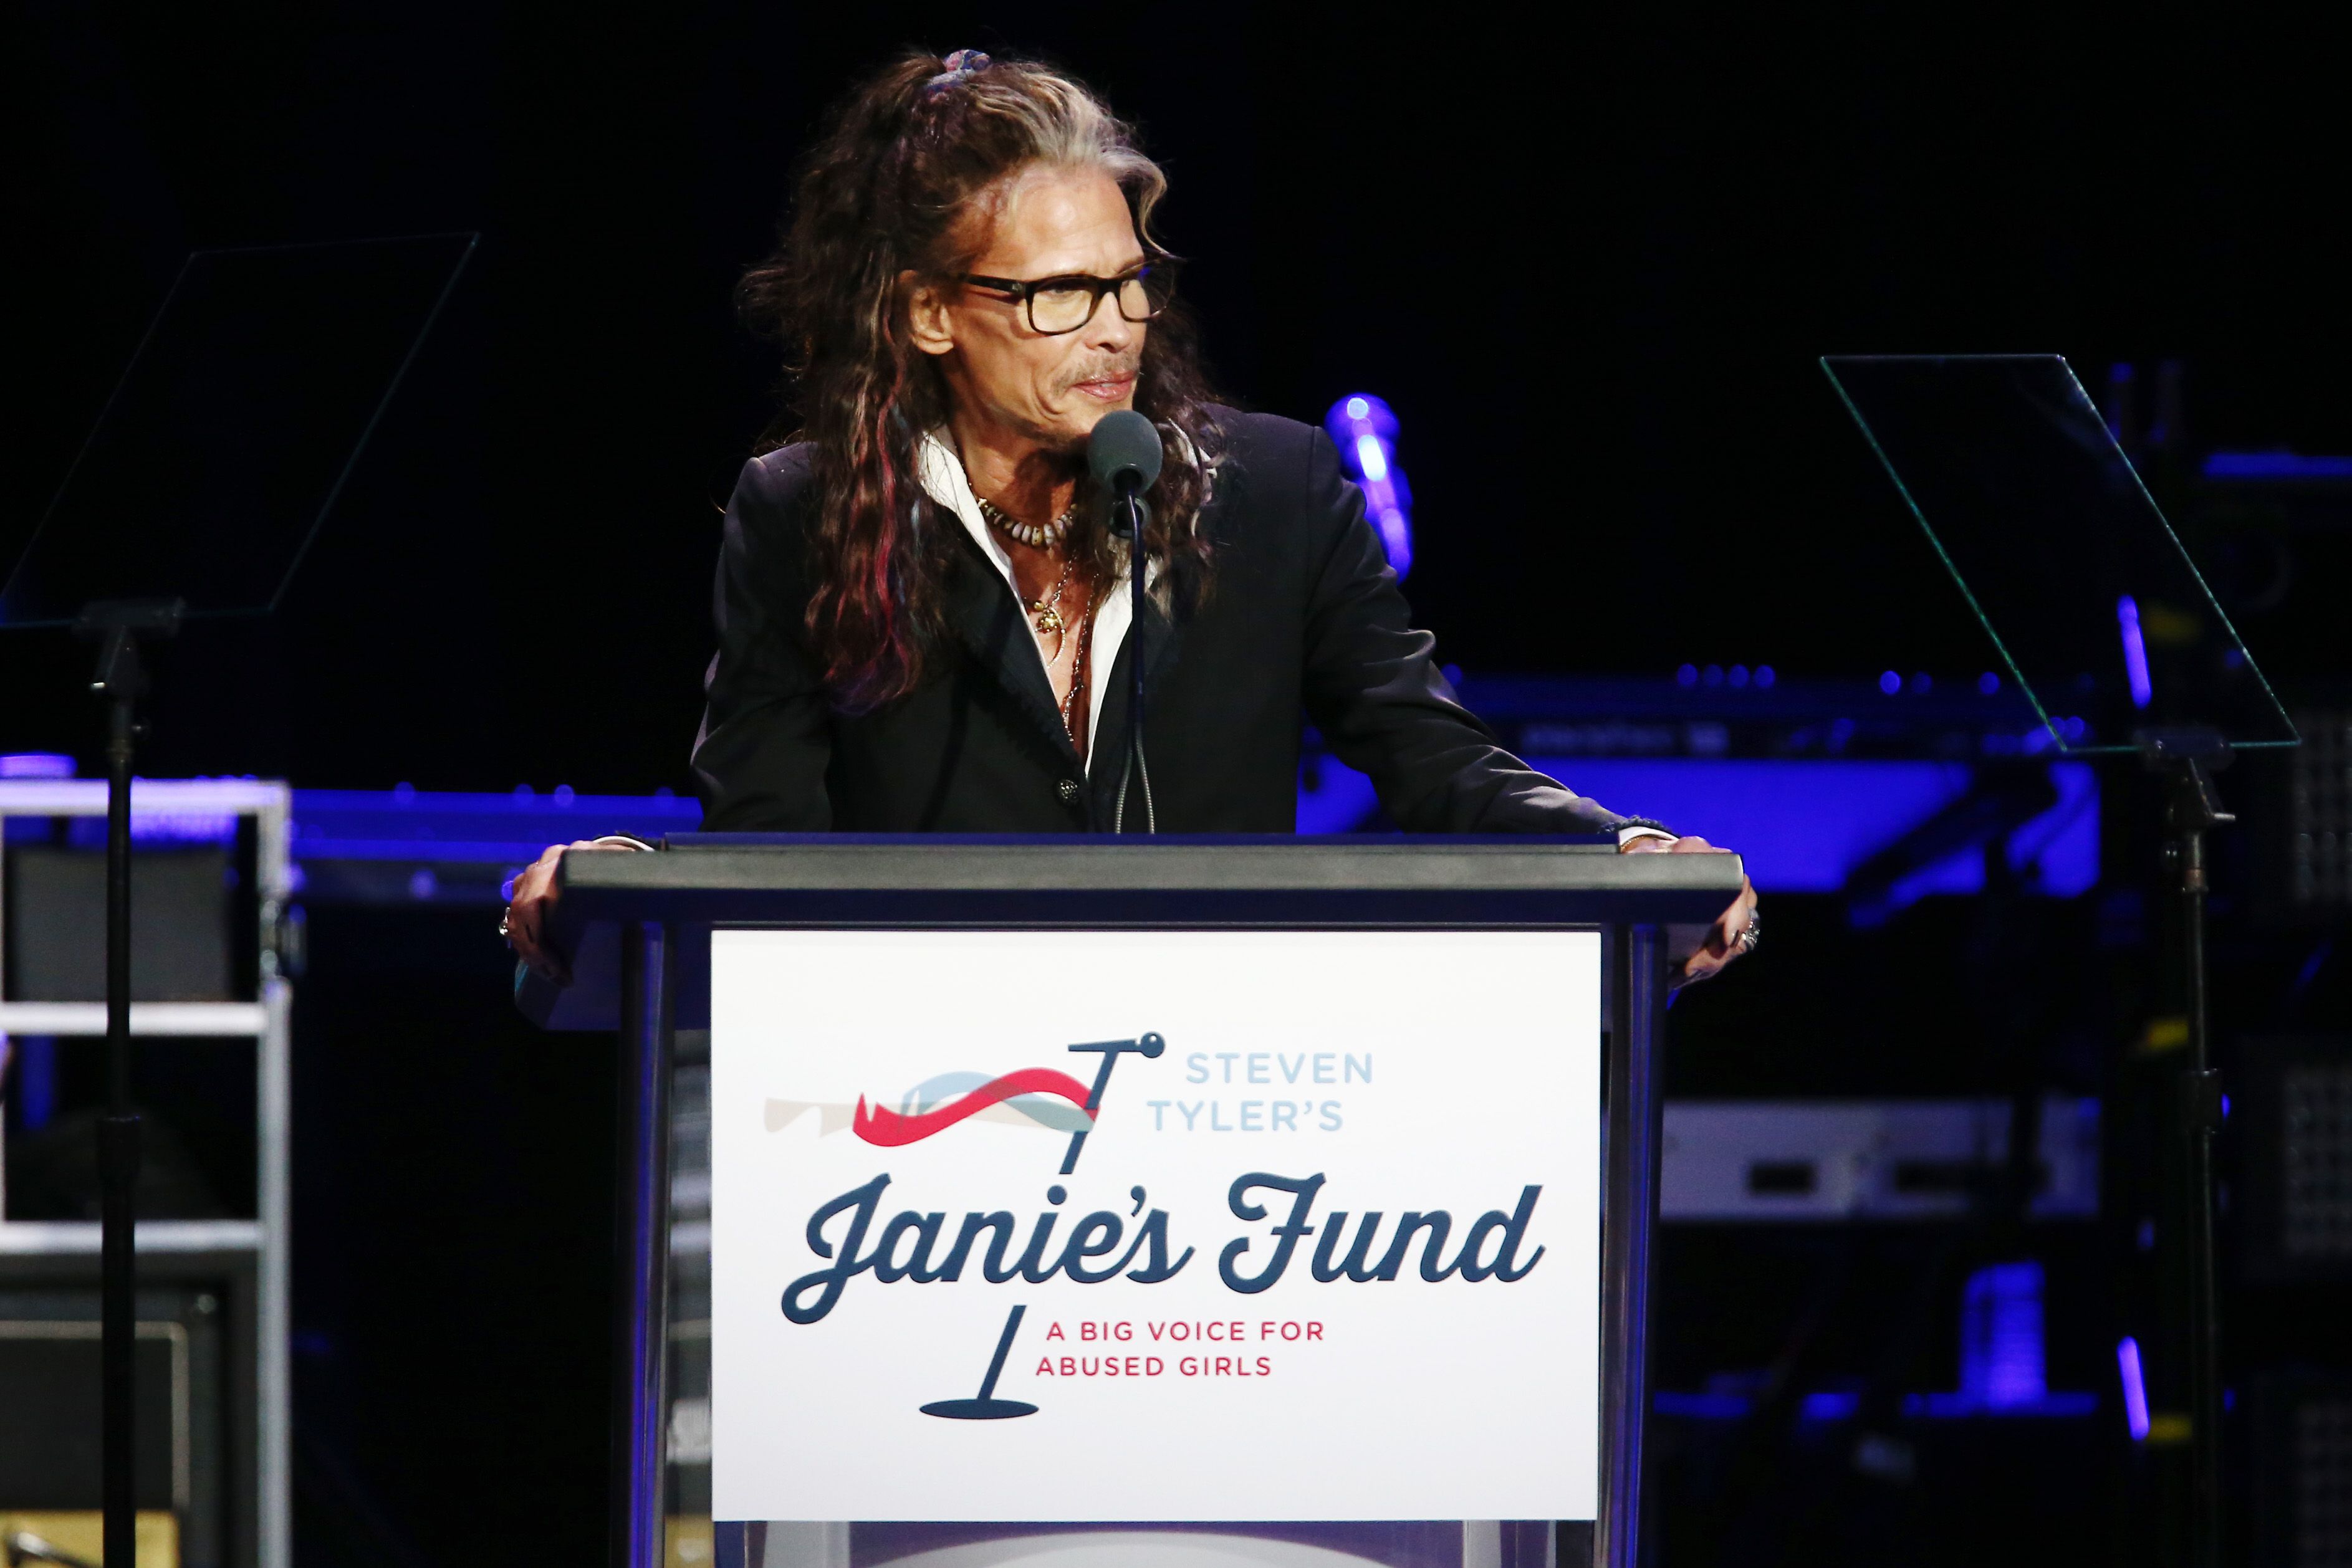 LOS ANGELES, CALIFORNIA - APRIL 03: Steven Tyler speaks onstage during Steven Tyler's 4th Annual GRAMMY Awards® Viewing Party benefitting Janie's Fund presented by Live Nation at Hollywood Palladium on April 03, 2022 in Los Angeles, California. (Photo by Tommaso Boddi/Getty Images for Janie's Fund)